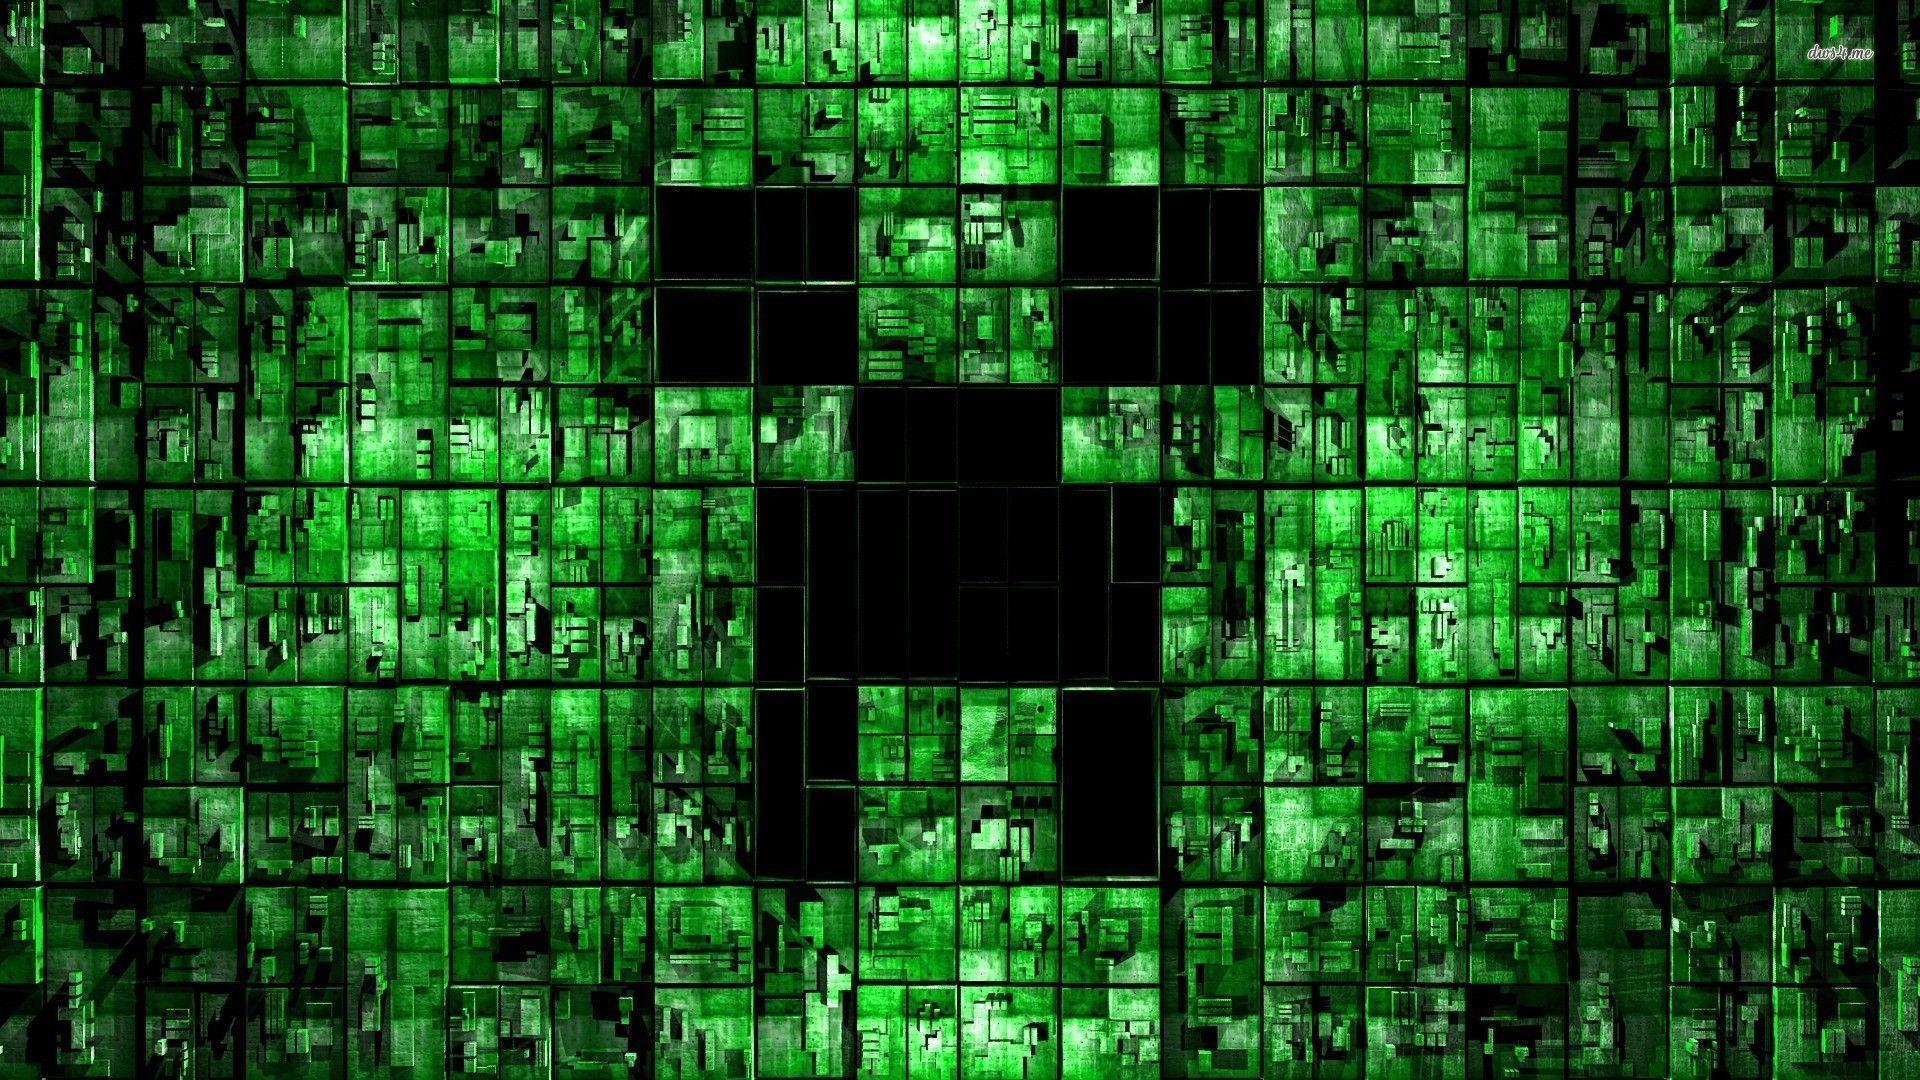 Creeper Minecraft Game Wallpapers 1920x1080 px Free Download